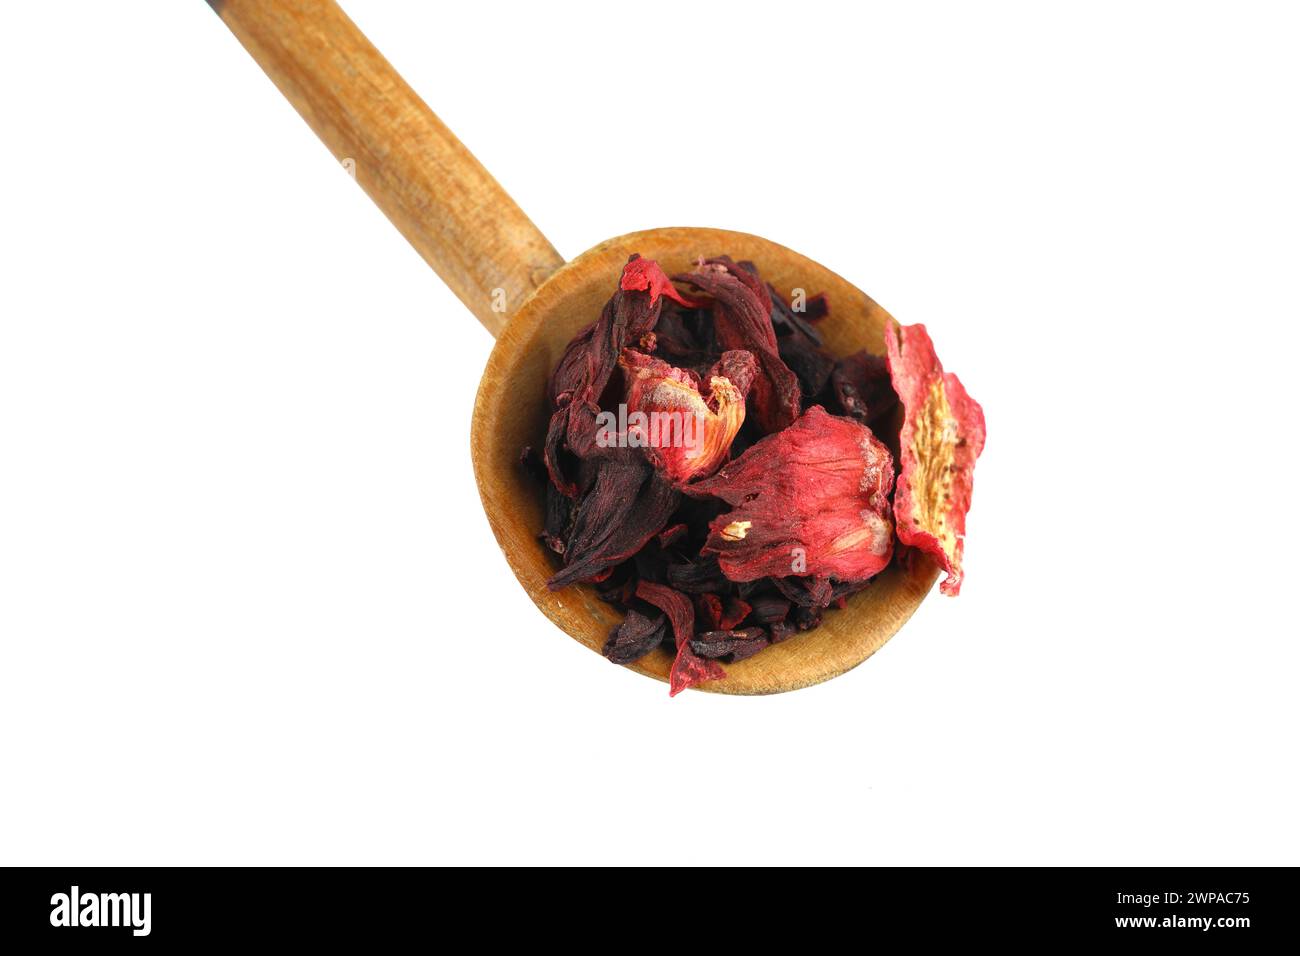 Karkade tea. Hibiscus tea leaves in wooden spoon isolated on white background. File contains clipping path. Top view. Stock Photo